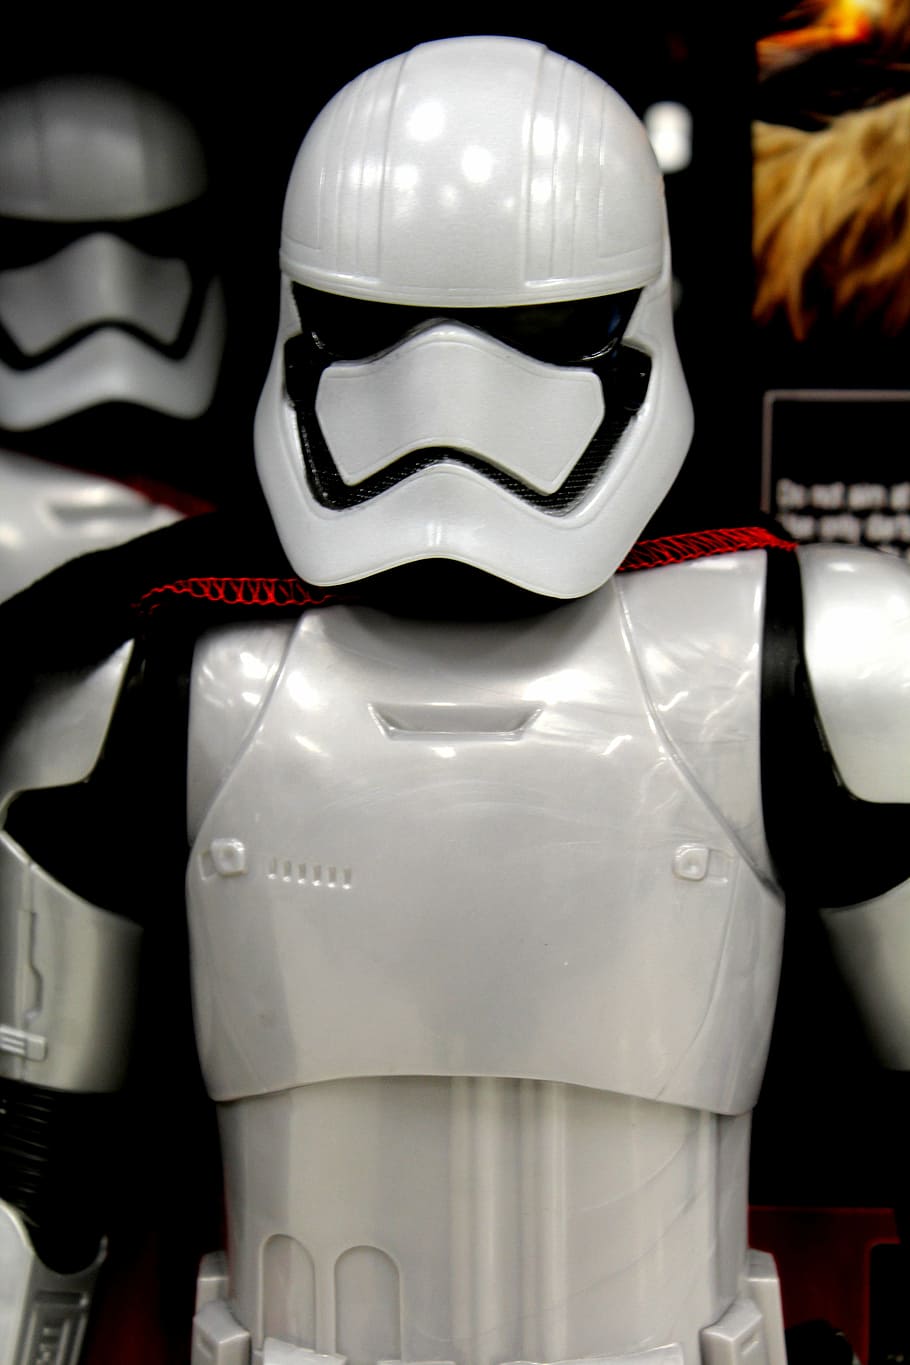 stormtrooper, starwars, toy, robot, helmet, headwear, close-up, indoors, white color, protection